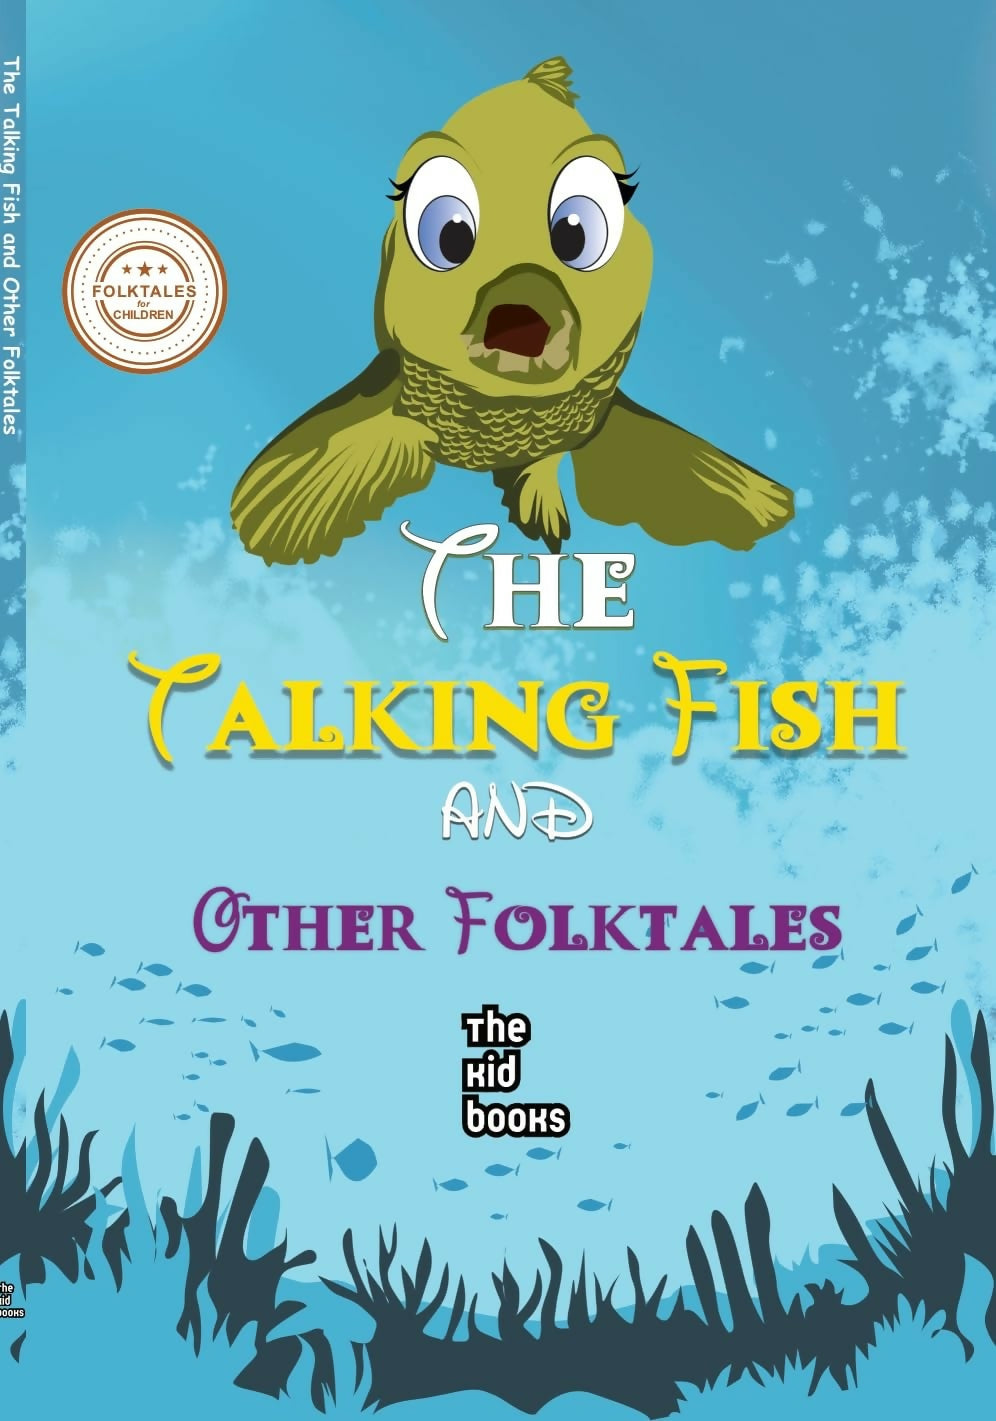 The Talking Fish And Other Folktales